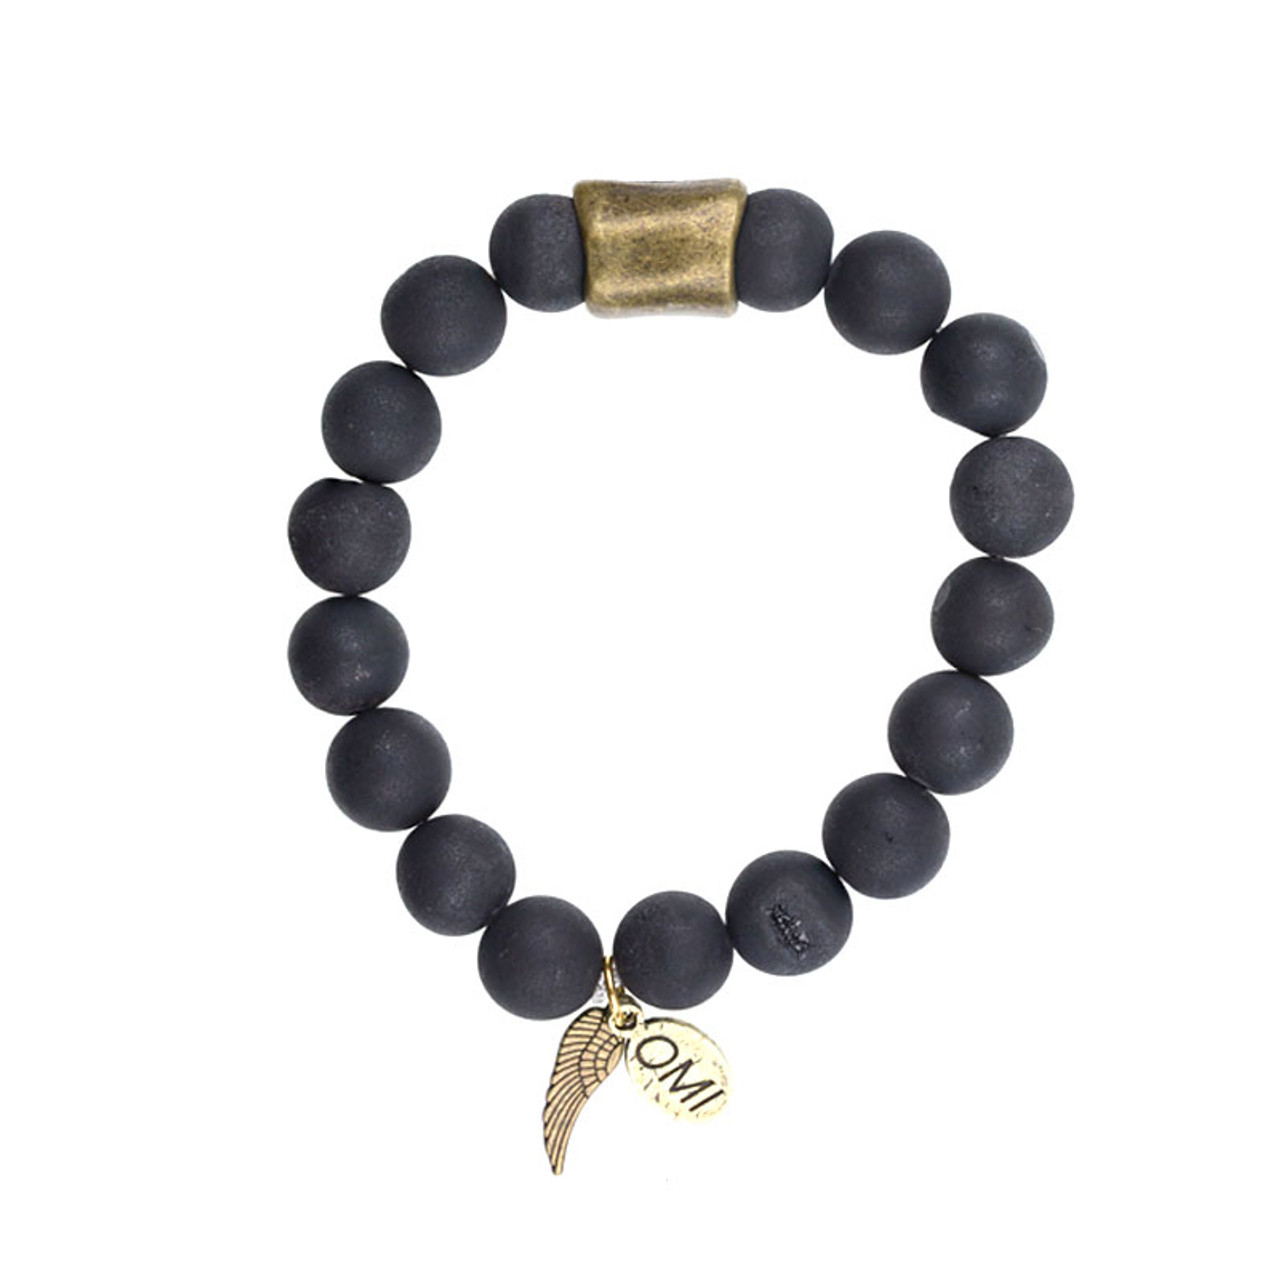 ite Bead Bracelet with Round Brass Spacers and OMI Charm and